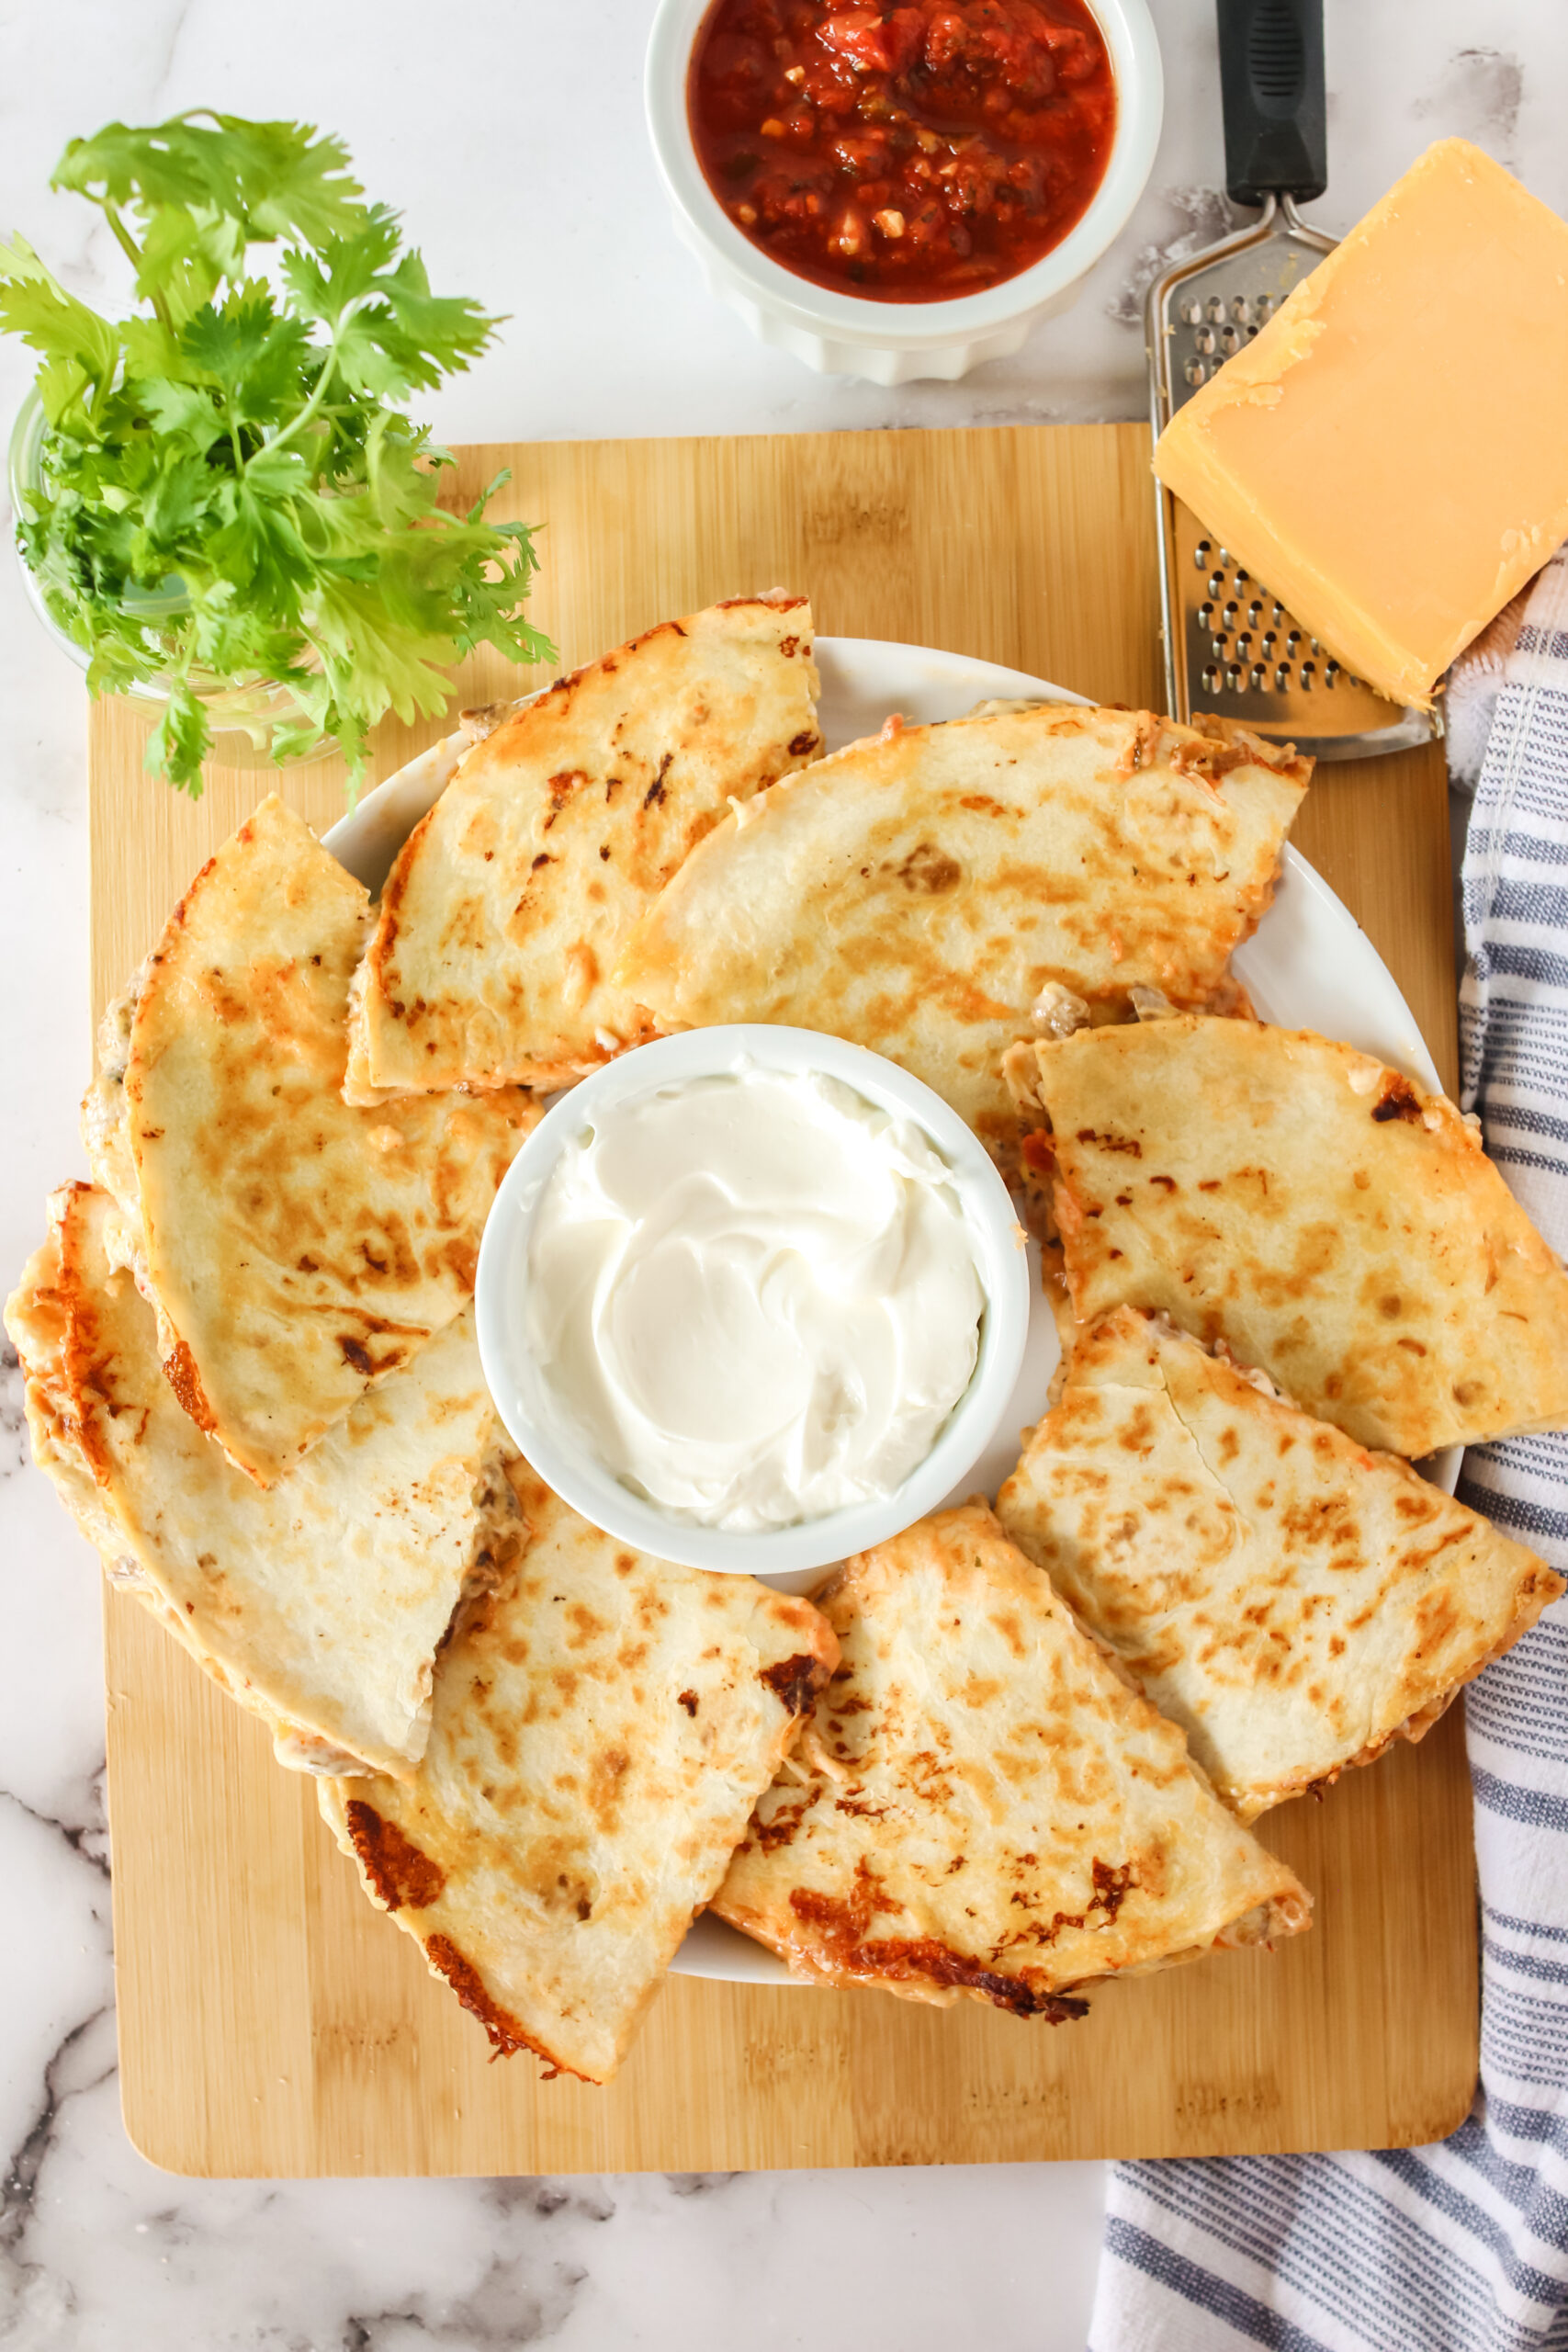 2 quesadillas cut and placed on a platter with a bowl sour cream